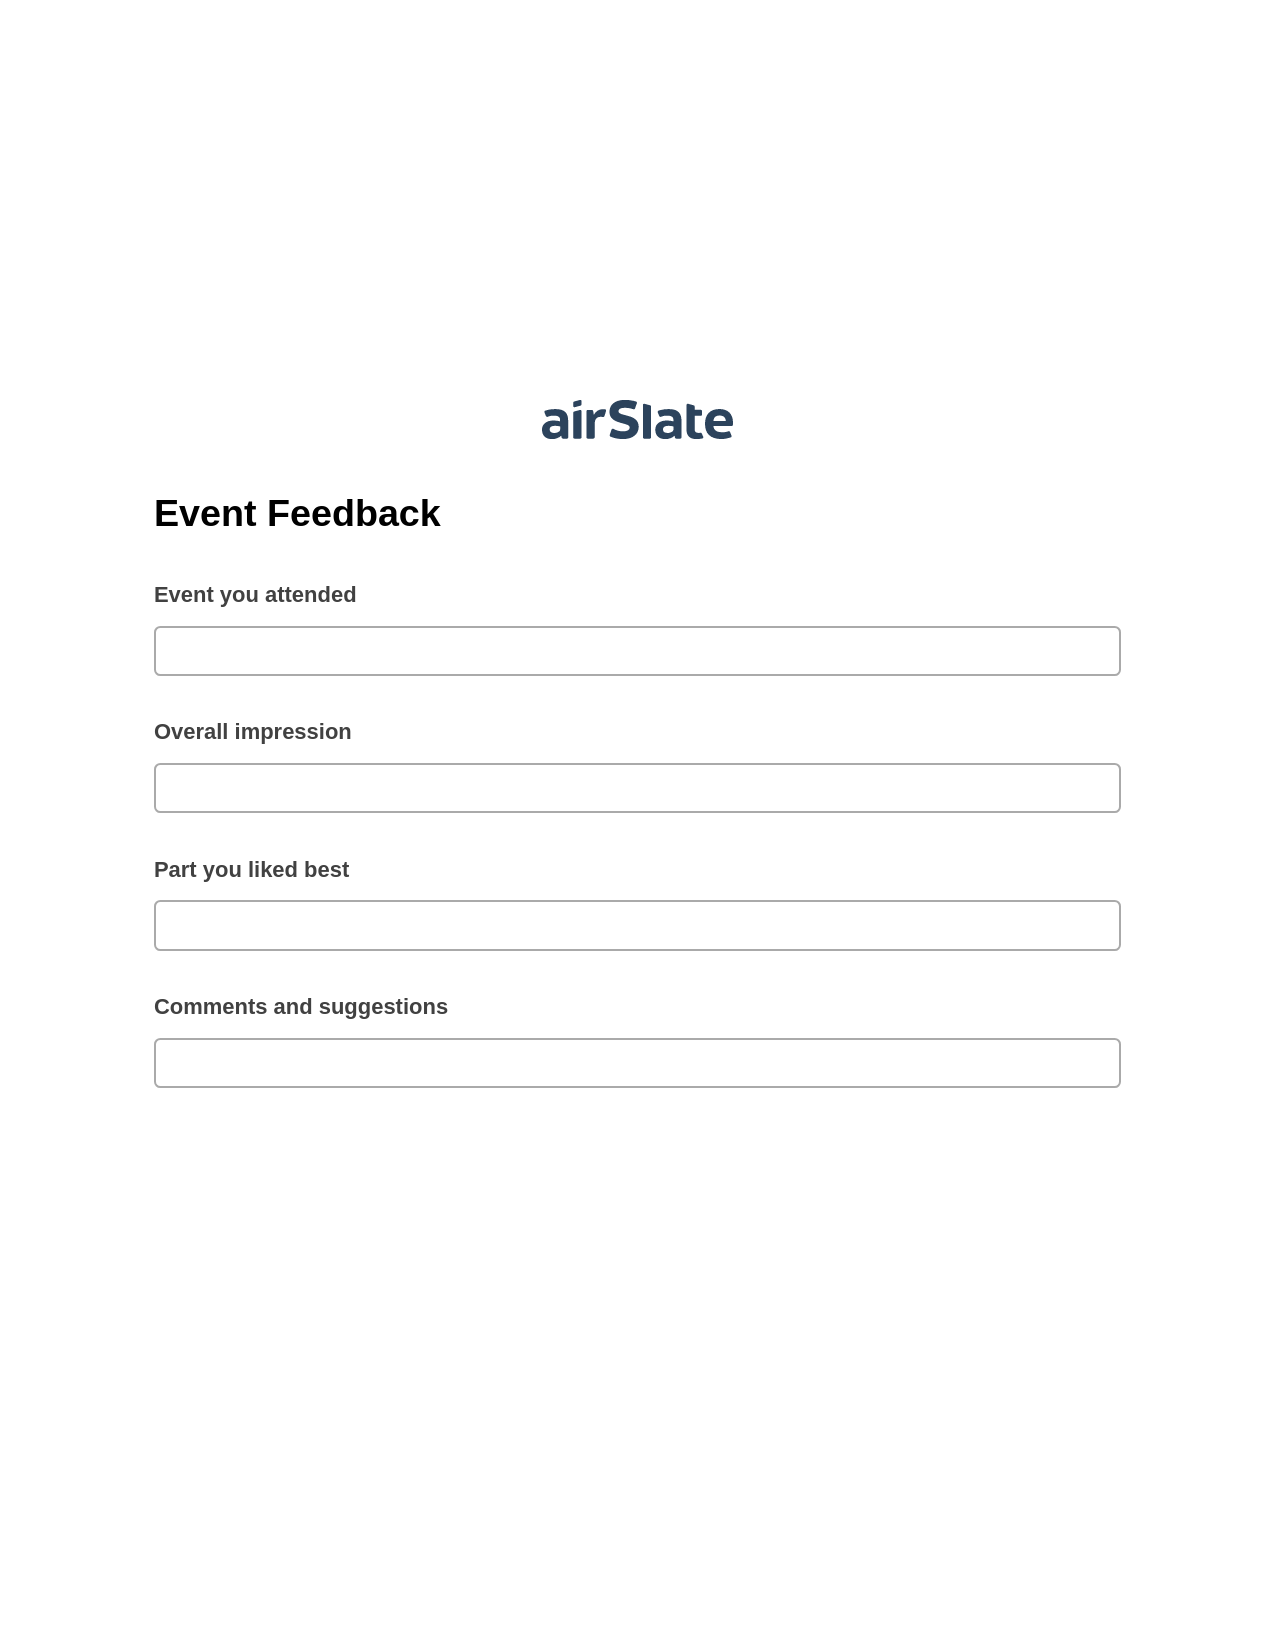 Event Feedback Pre-fill from another Slate Bot, Add Tags to Slate Bot, Export to NetSuite Record Bot